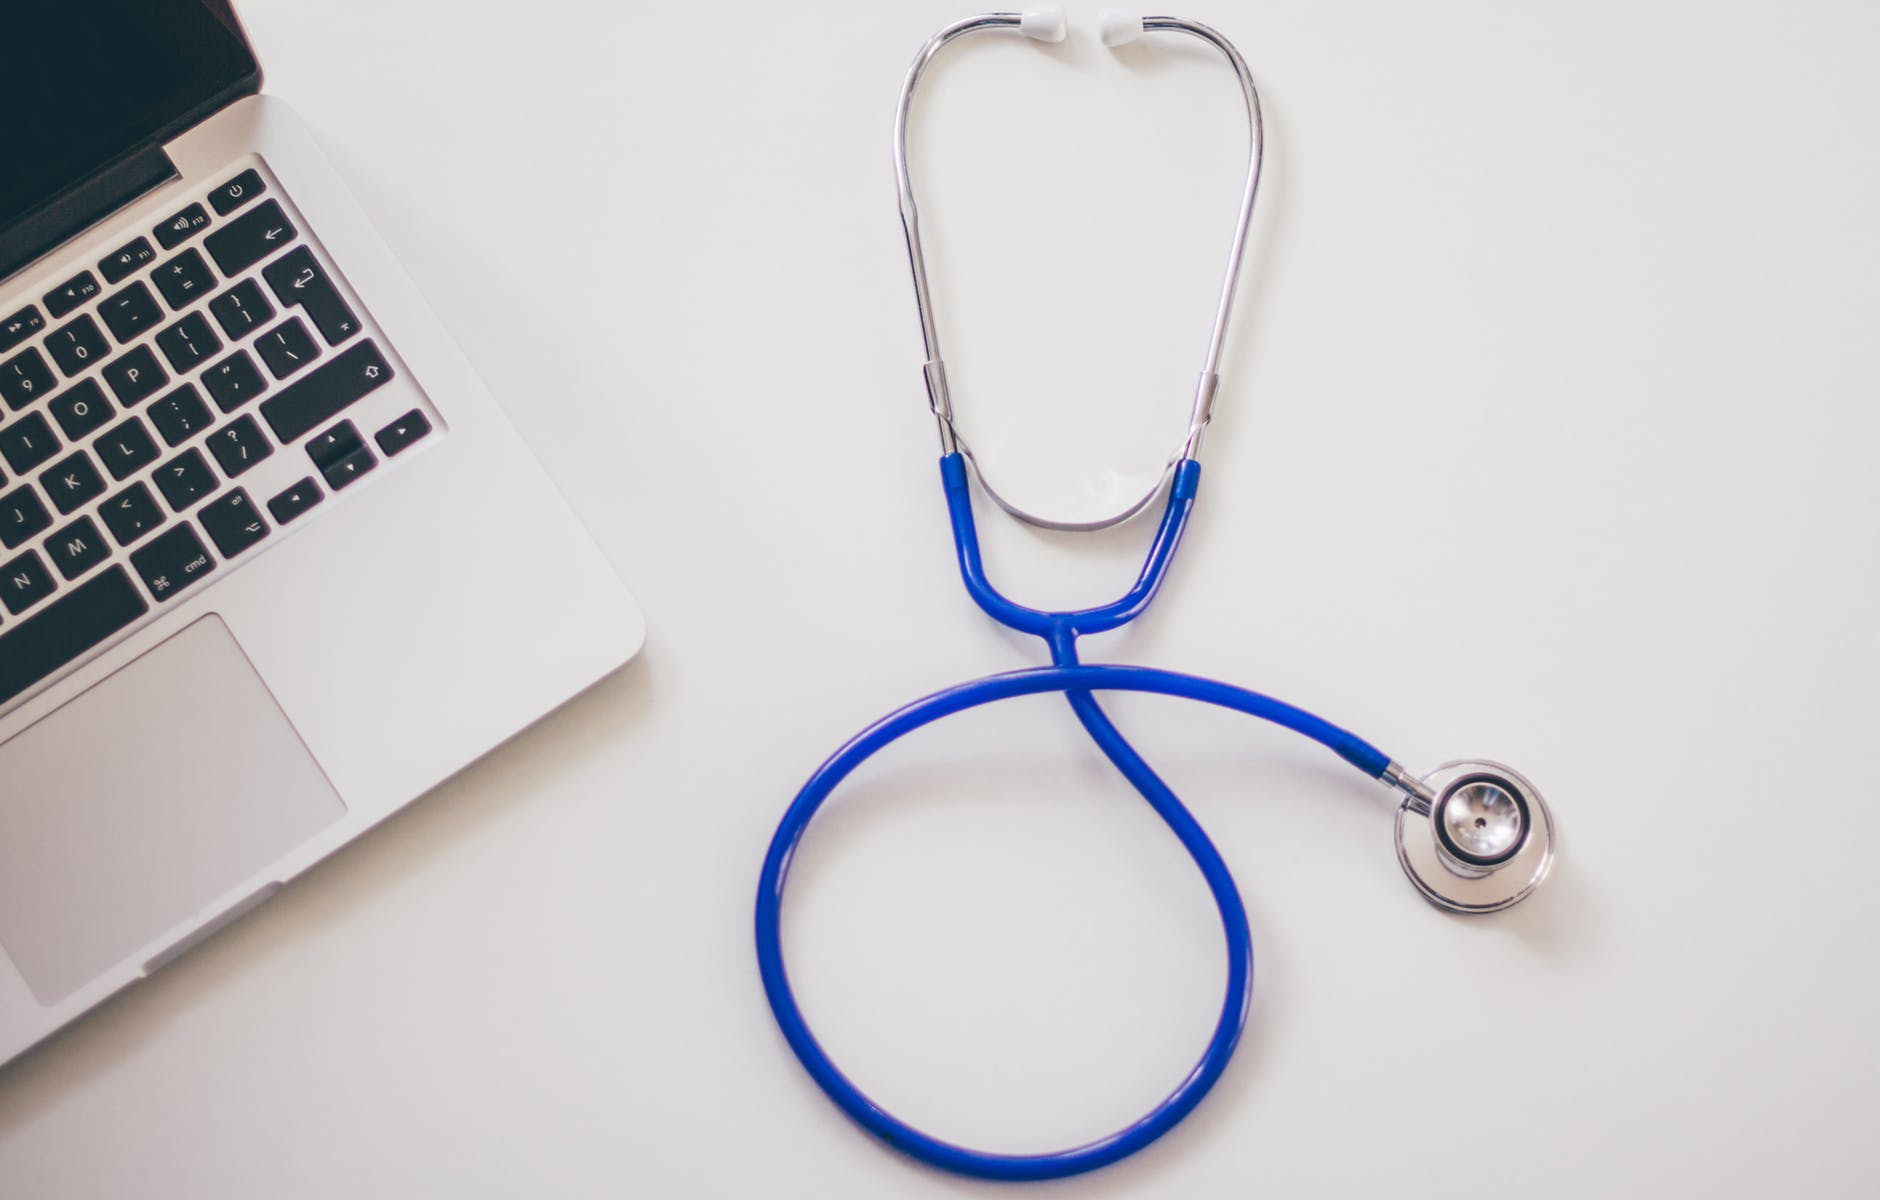 A blue stethoscope on a white table next to a laptop